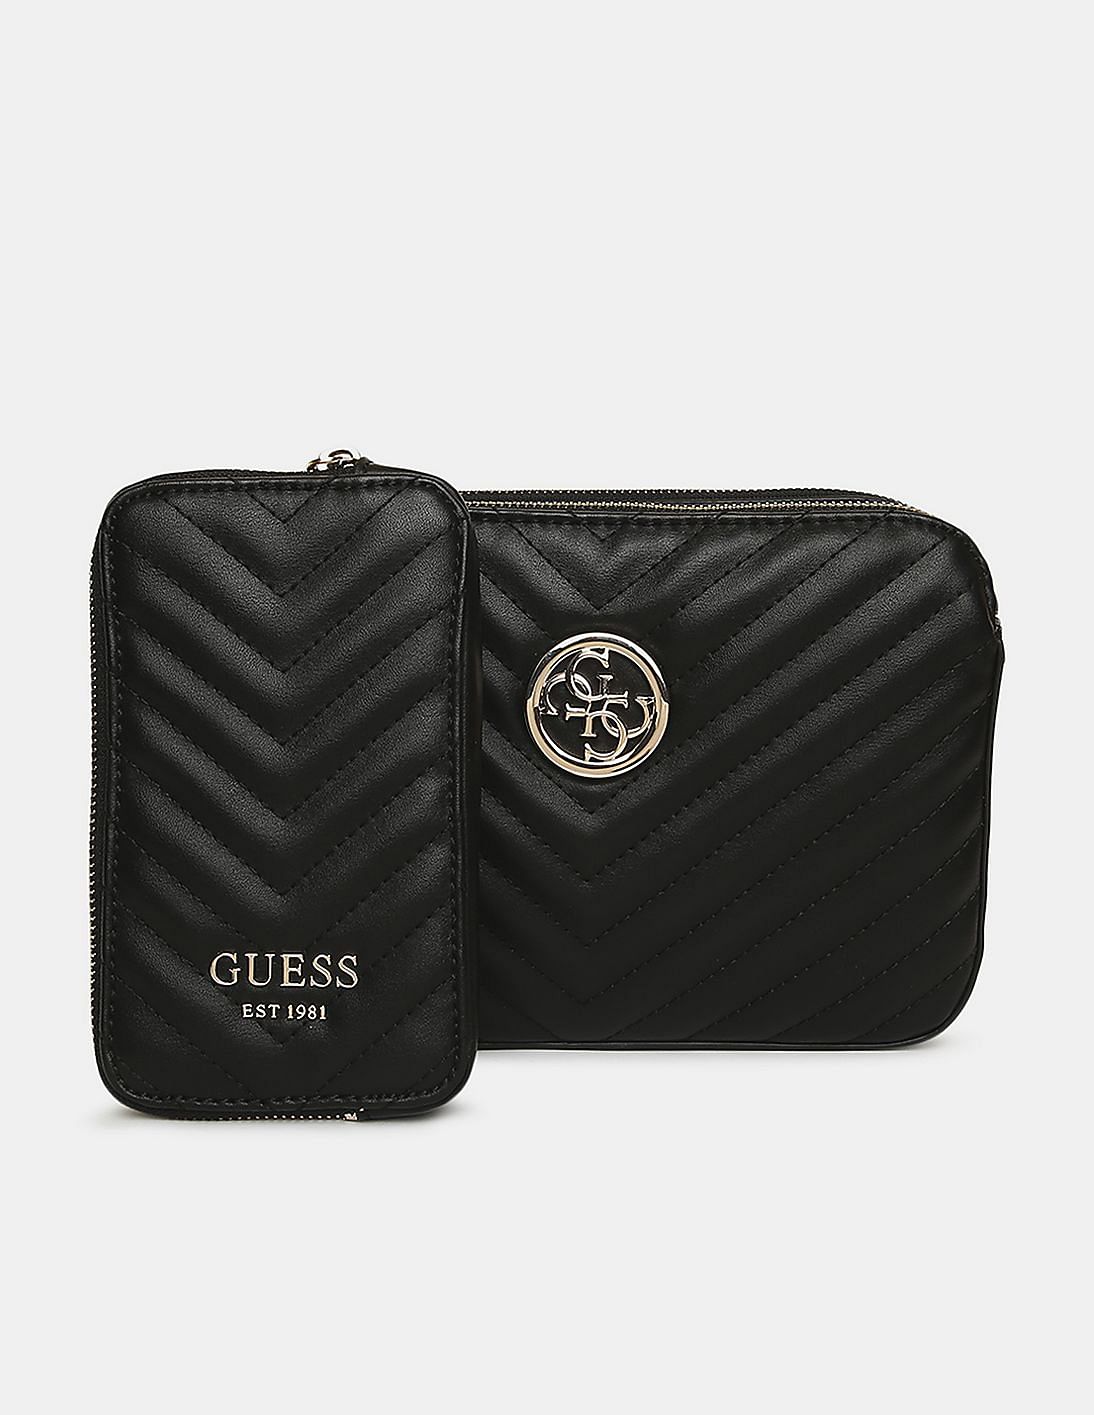 Guess Blakely Status Crossbody Bag w/ Detachable Pouch on sale